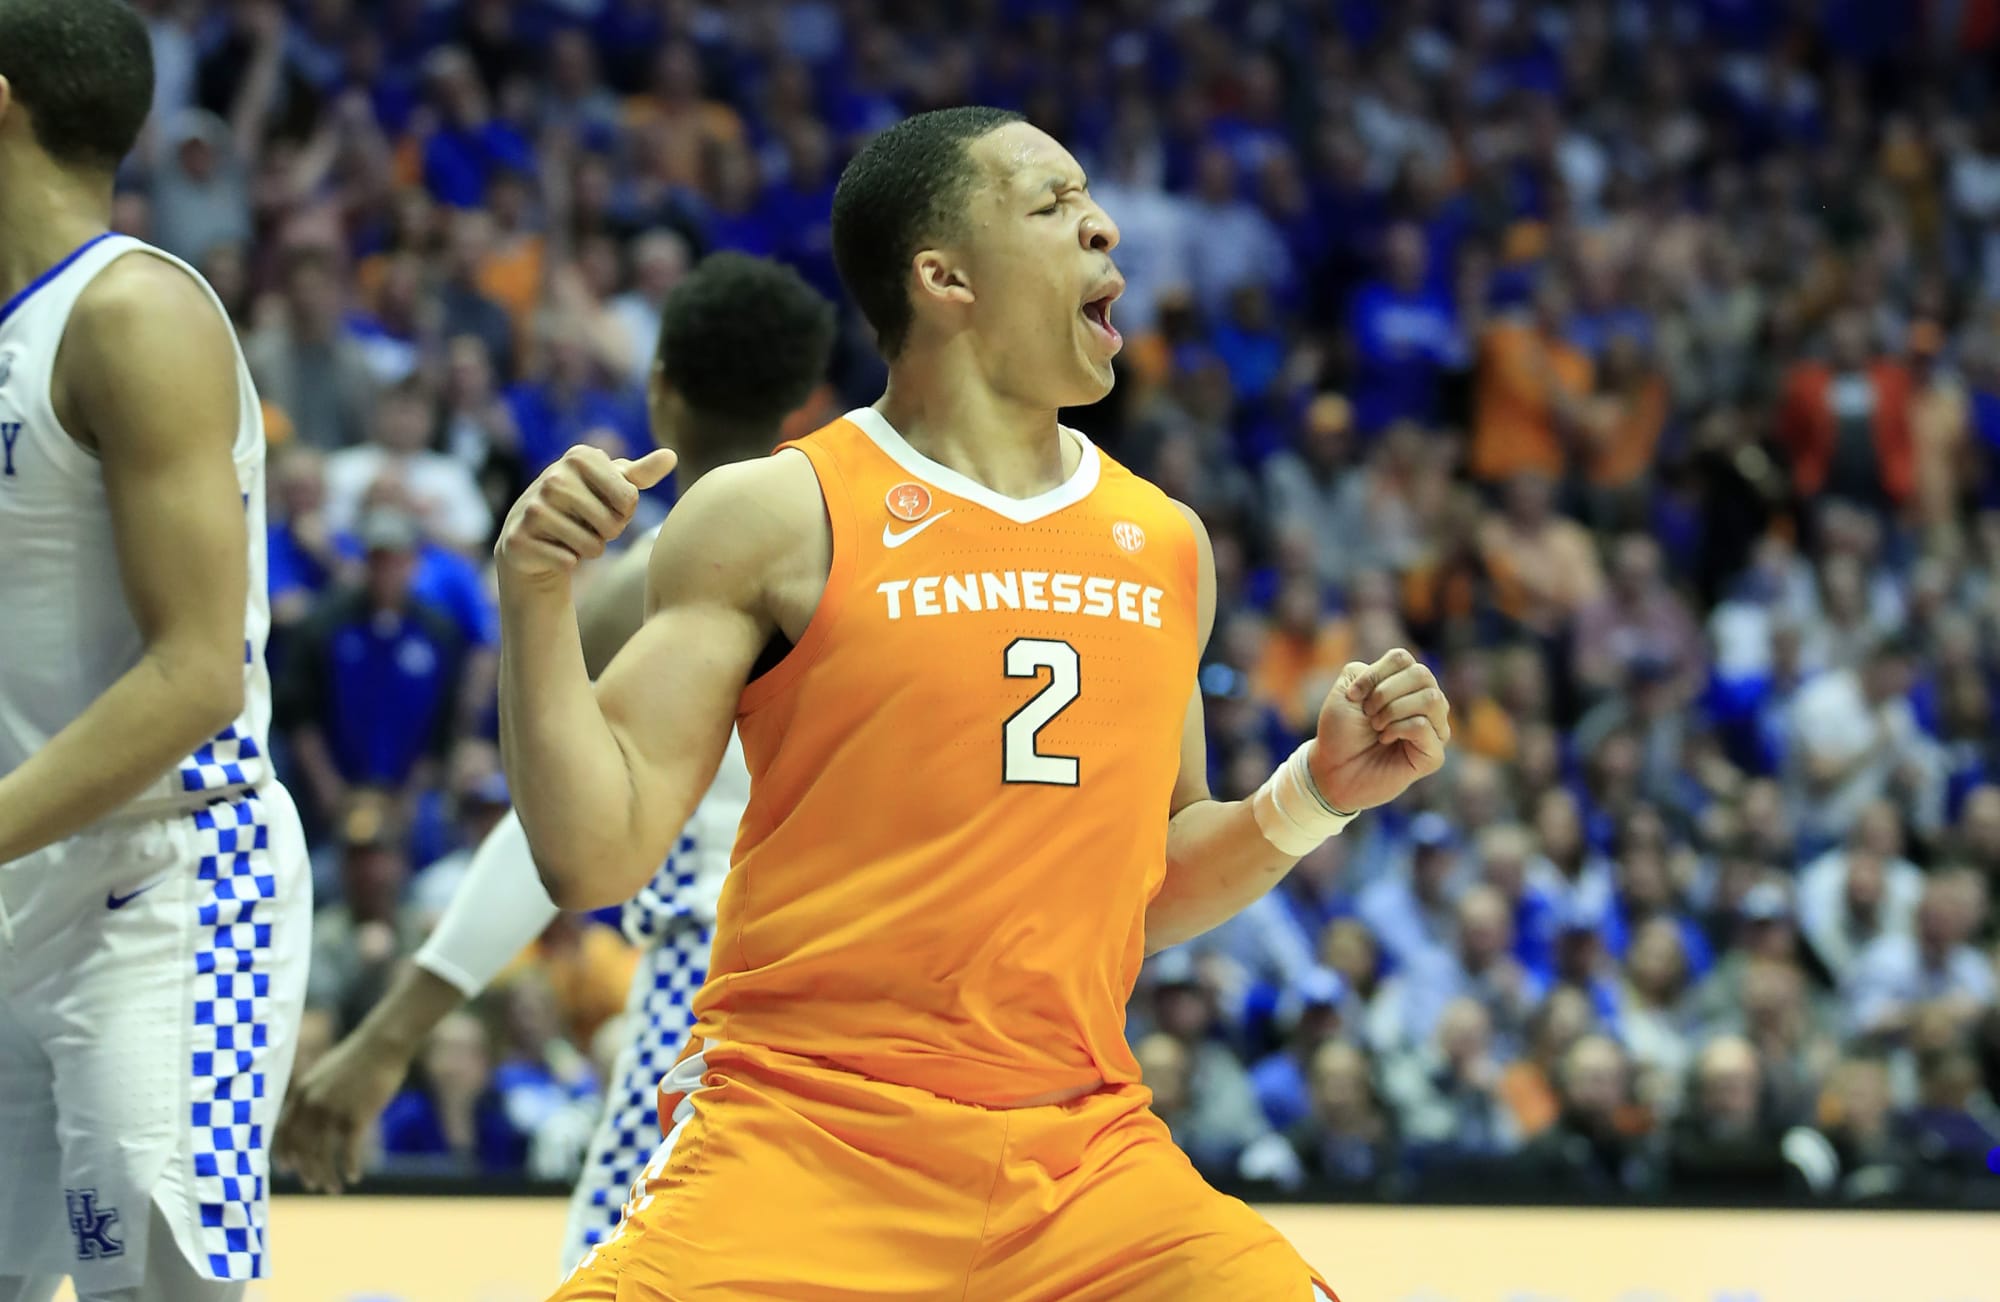 Tennessee basketball: A look at the Vols road to the Final Four